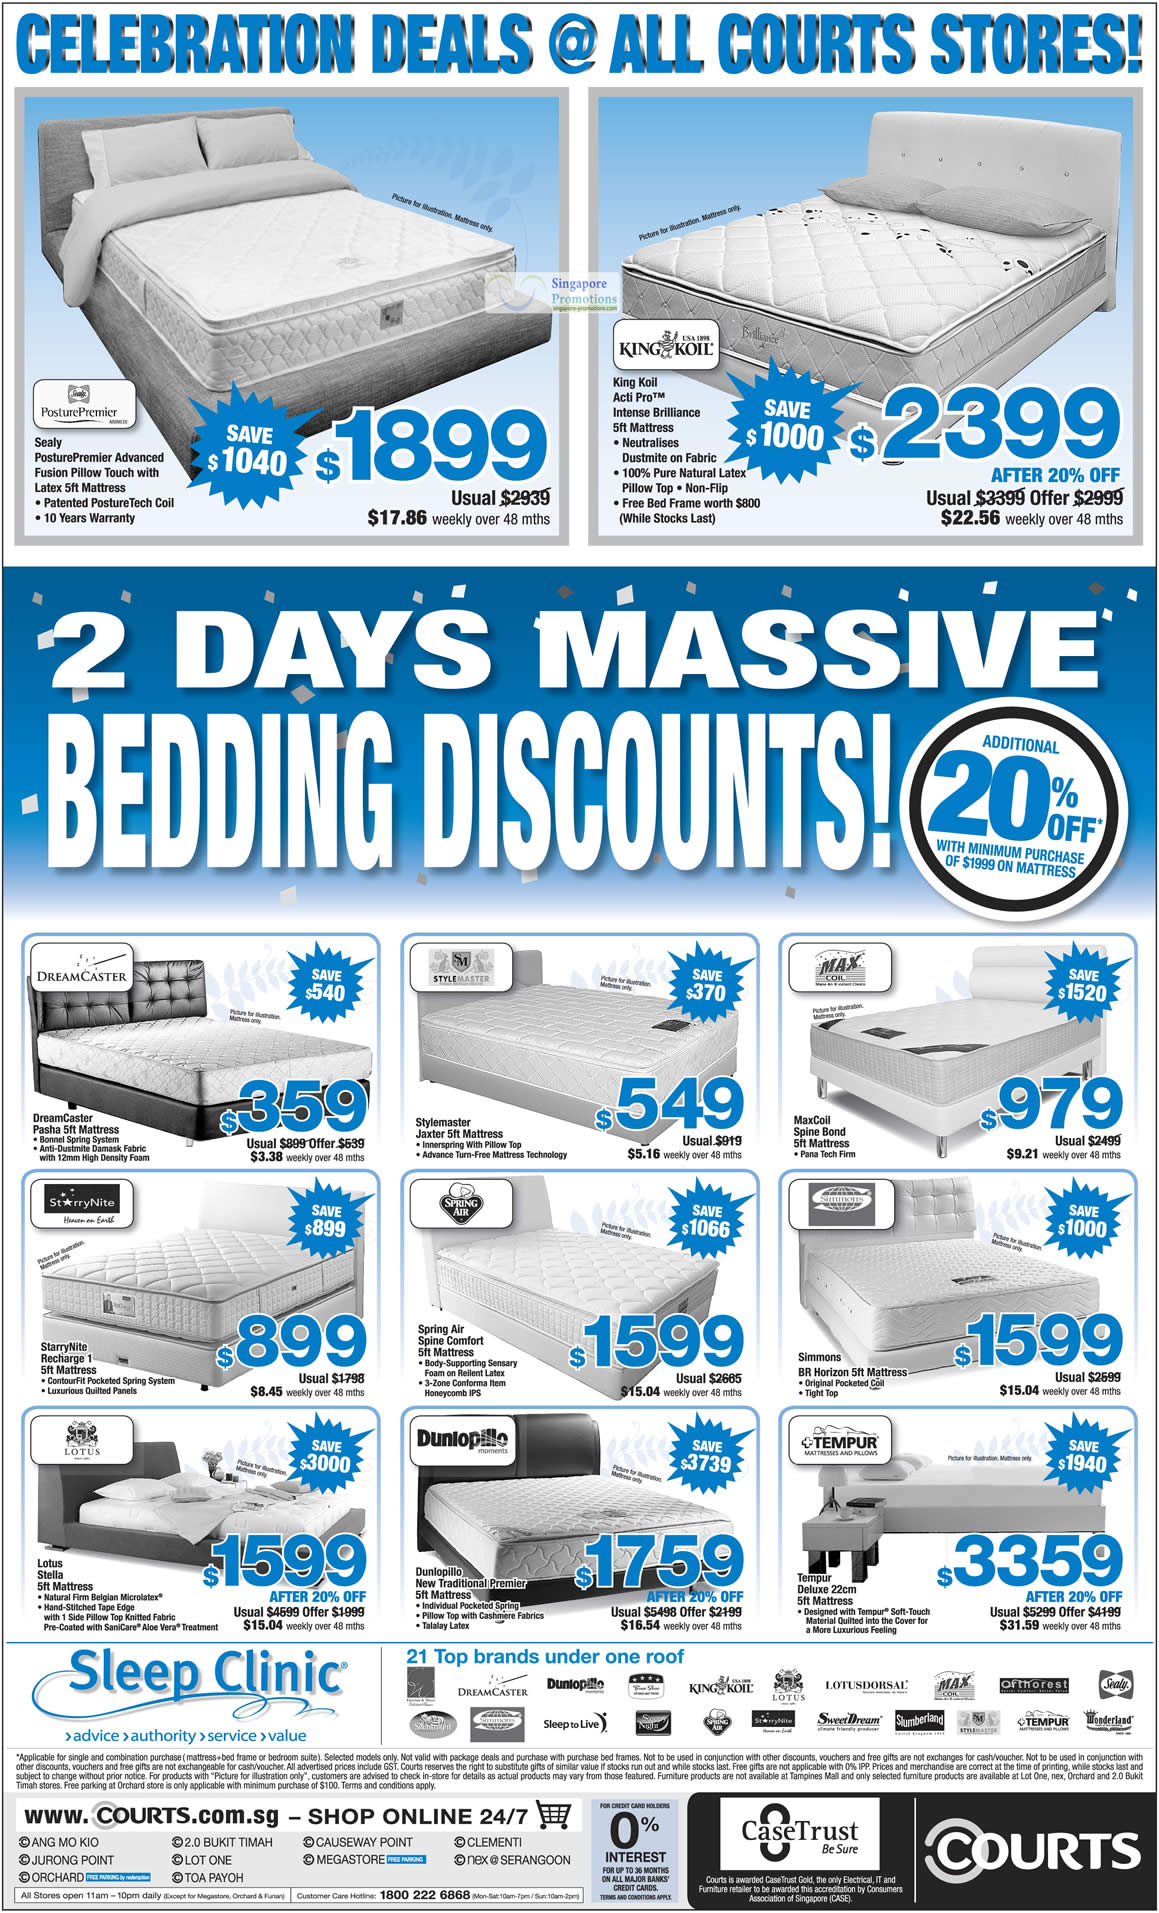 Featured image for Courts Celebration Deals Promotion Offers 21 - 27 Apr 2012